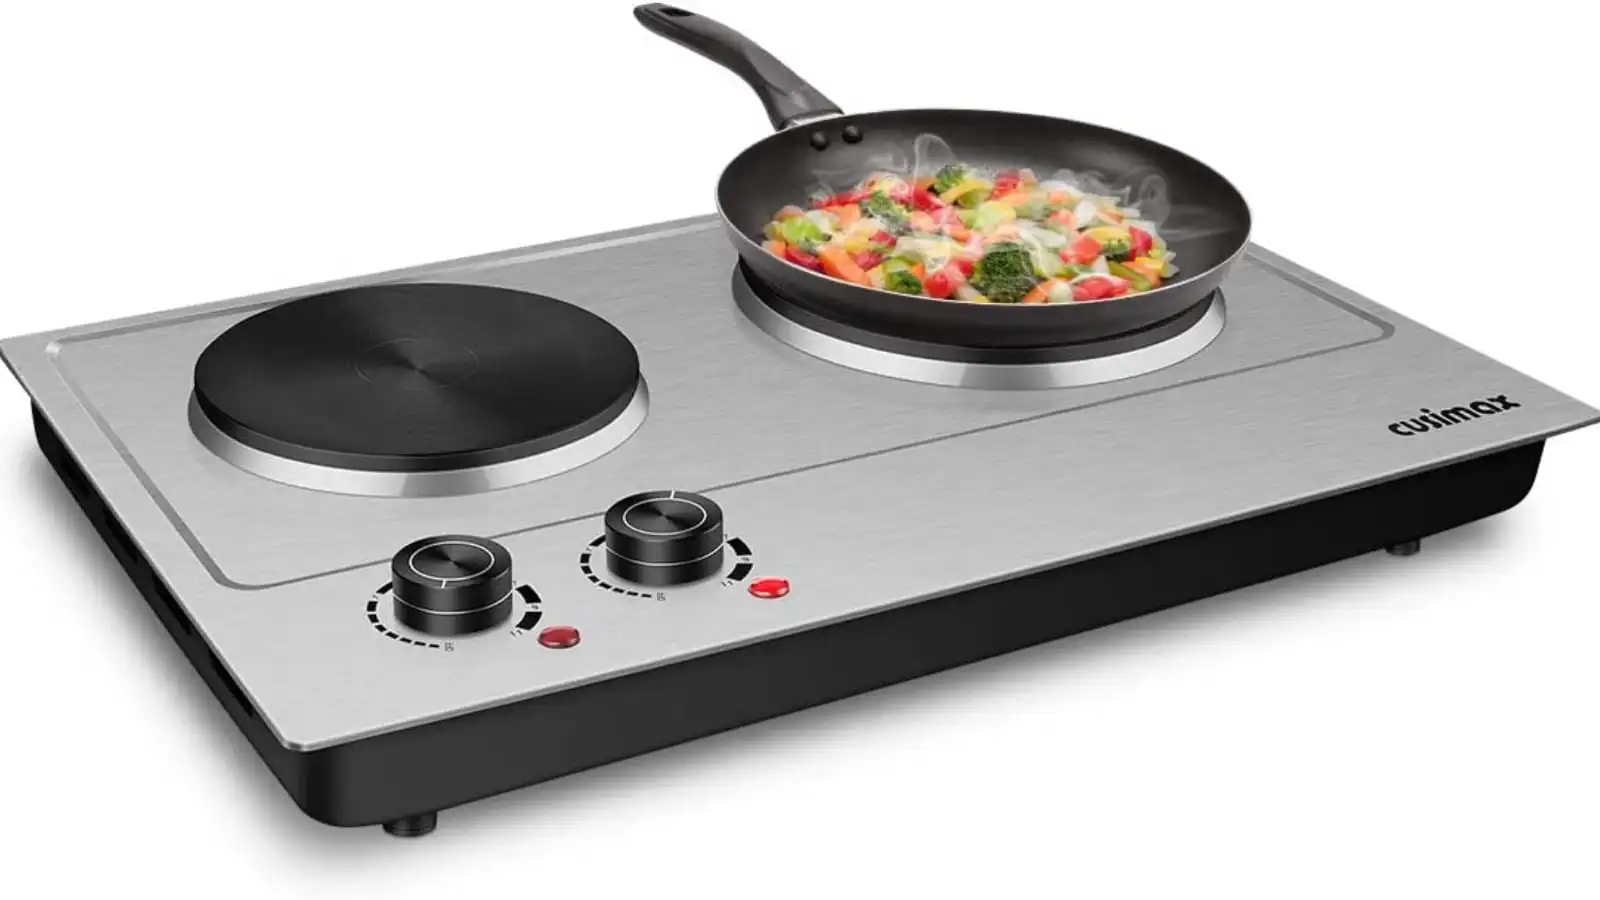 1800W Double Hot Plate for Cooking Double Burners  Countertop Burner Cast Iron Hot Plates Cooktop Stainless Steel Silver